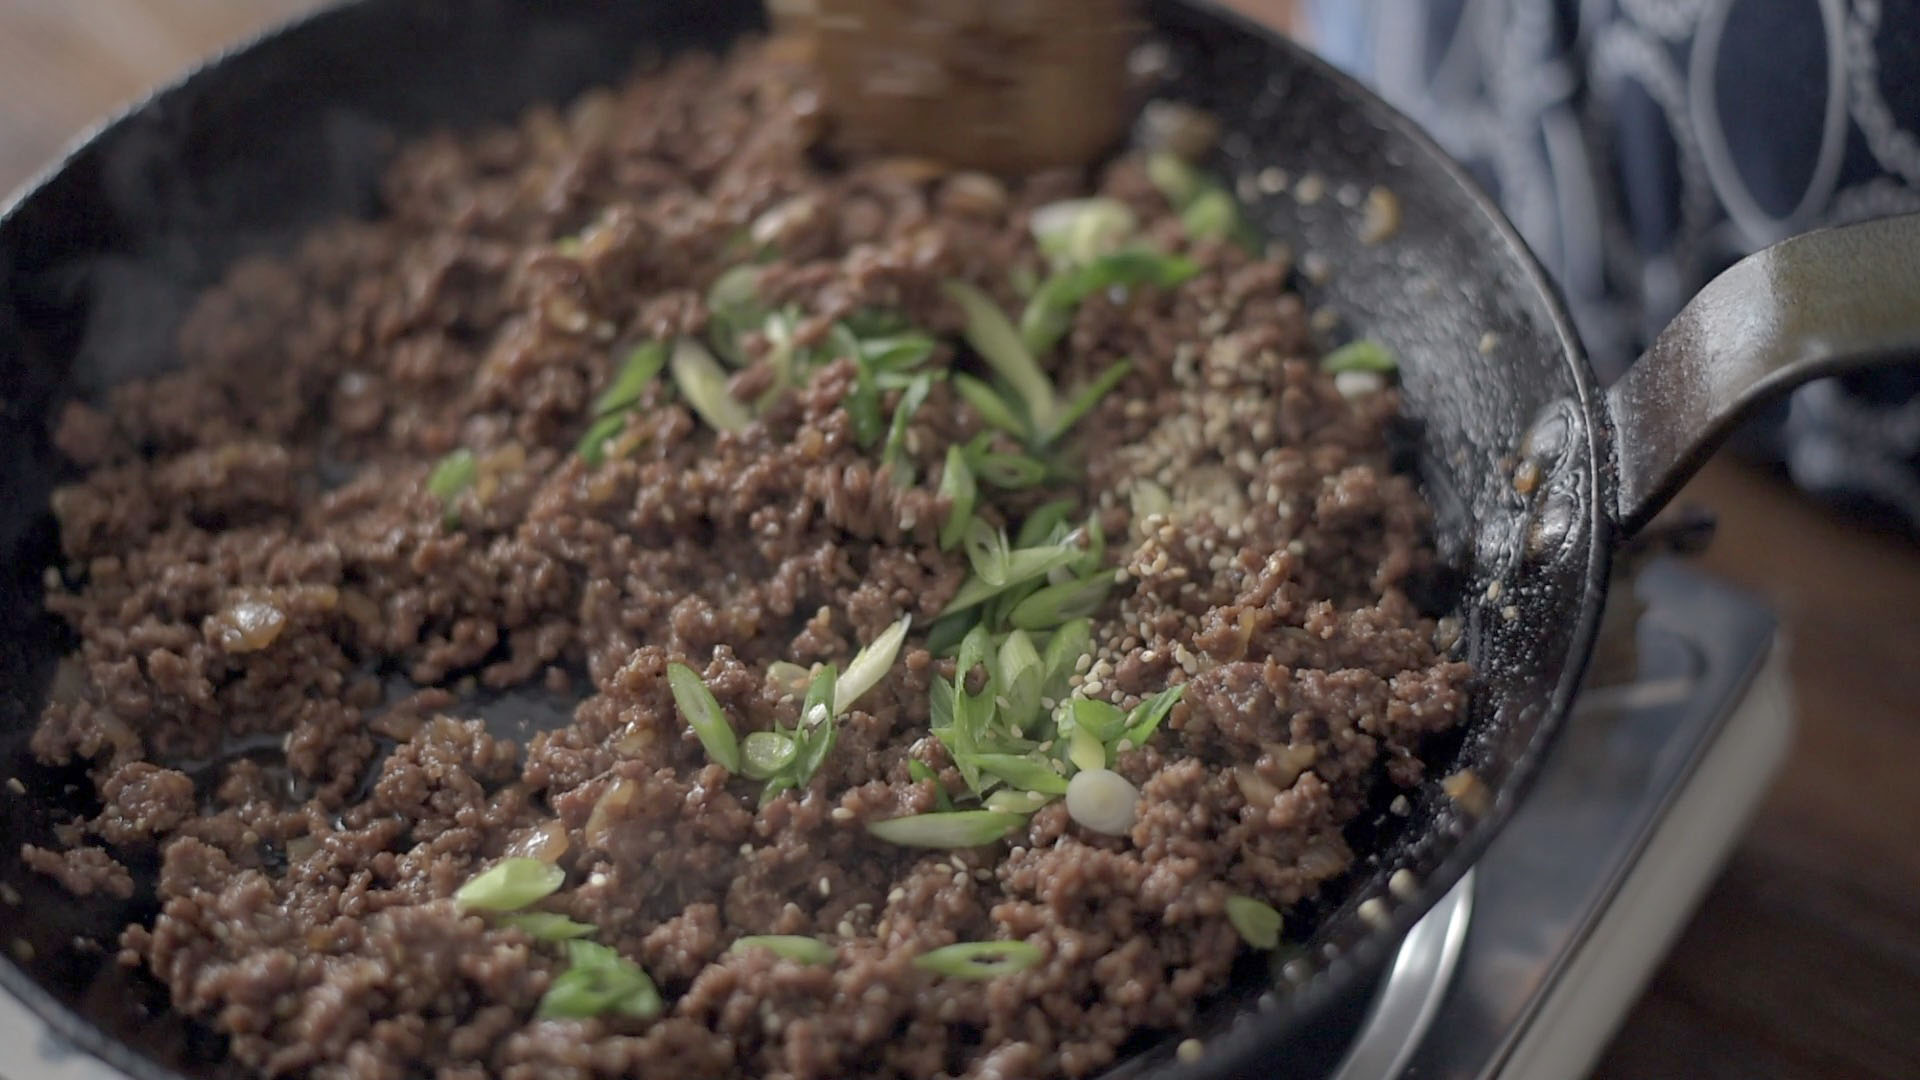 Green onion added to garnish ground beef bulgogi at the end.